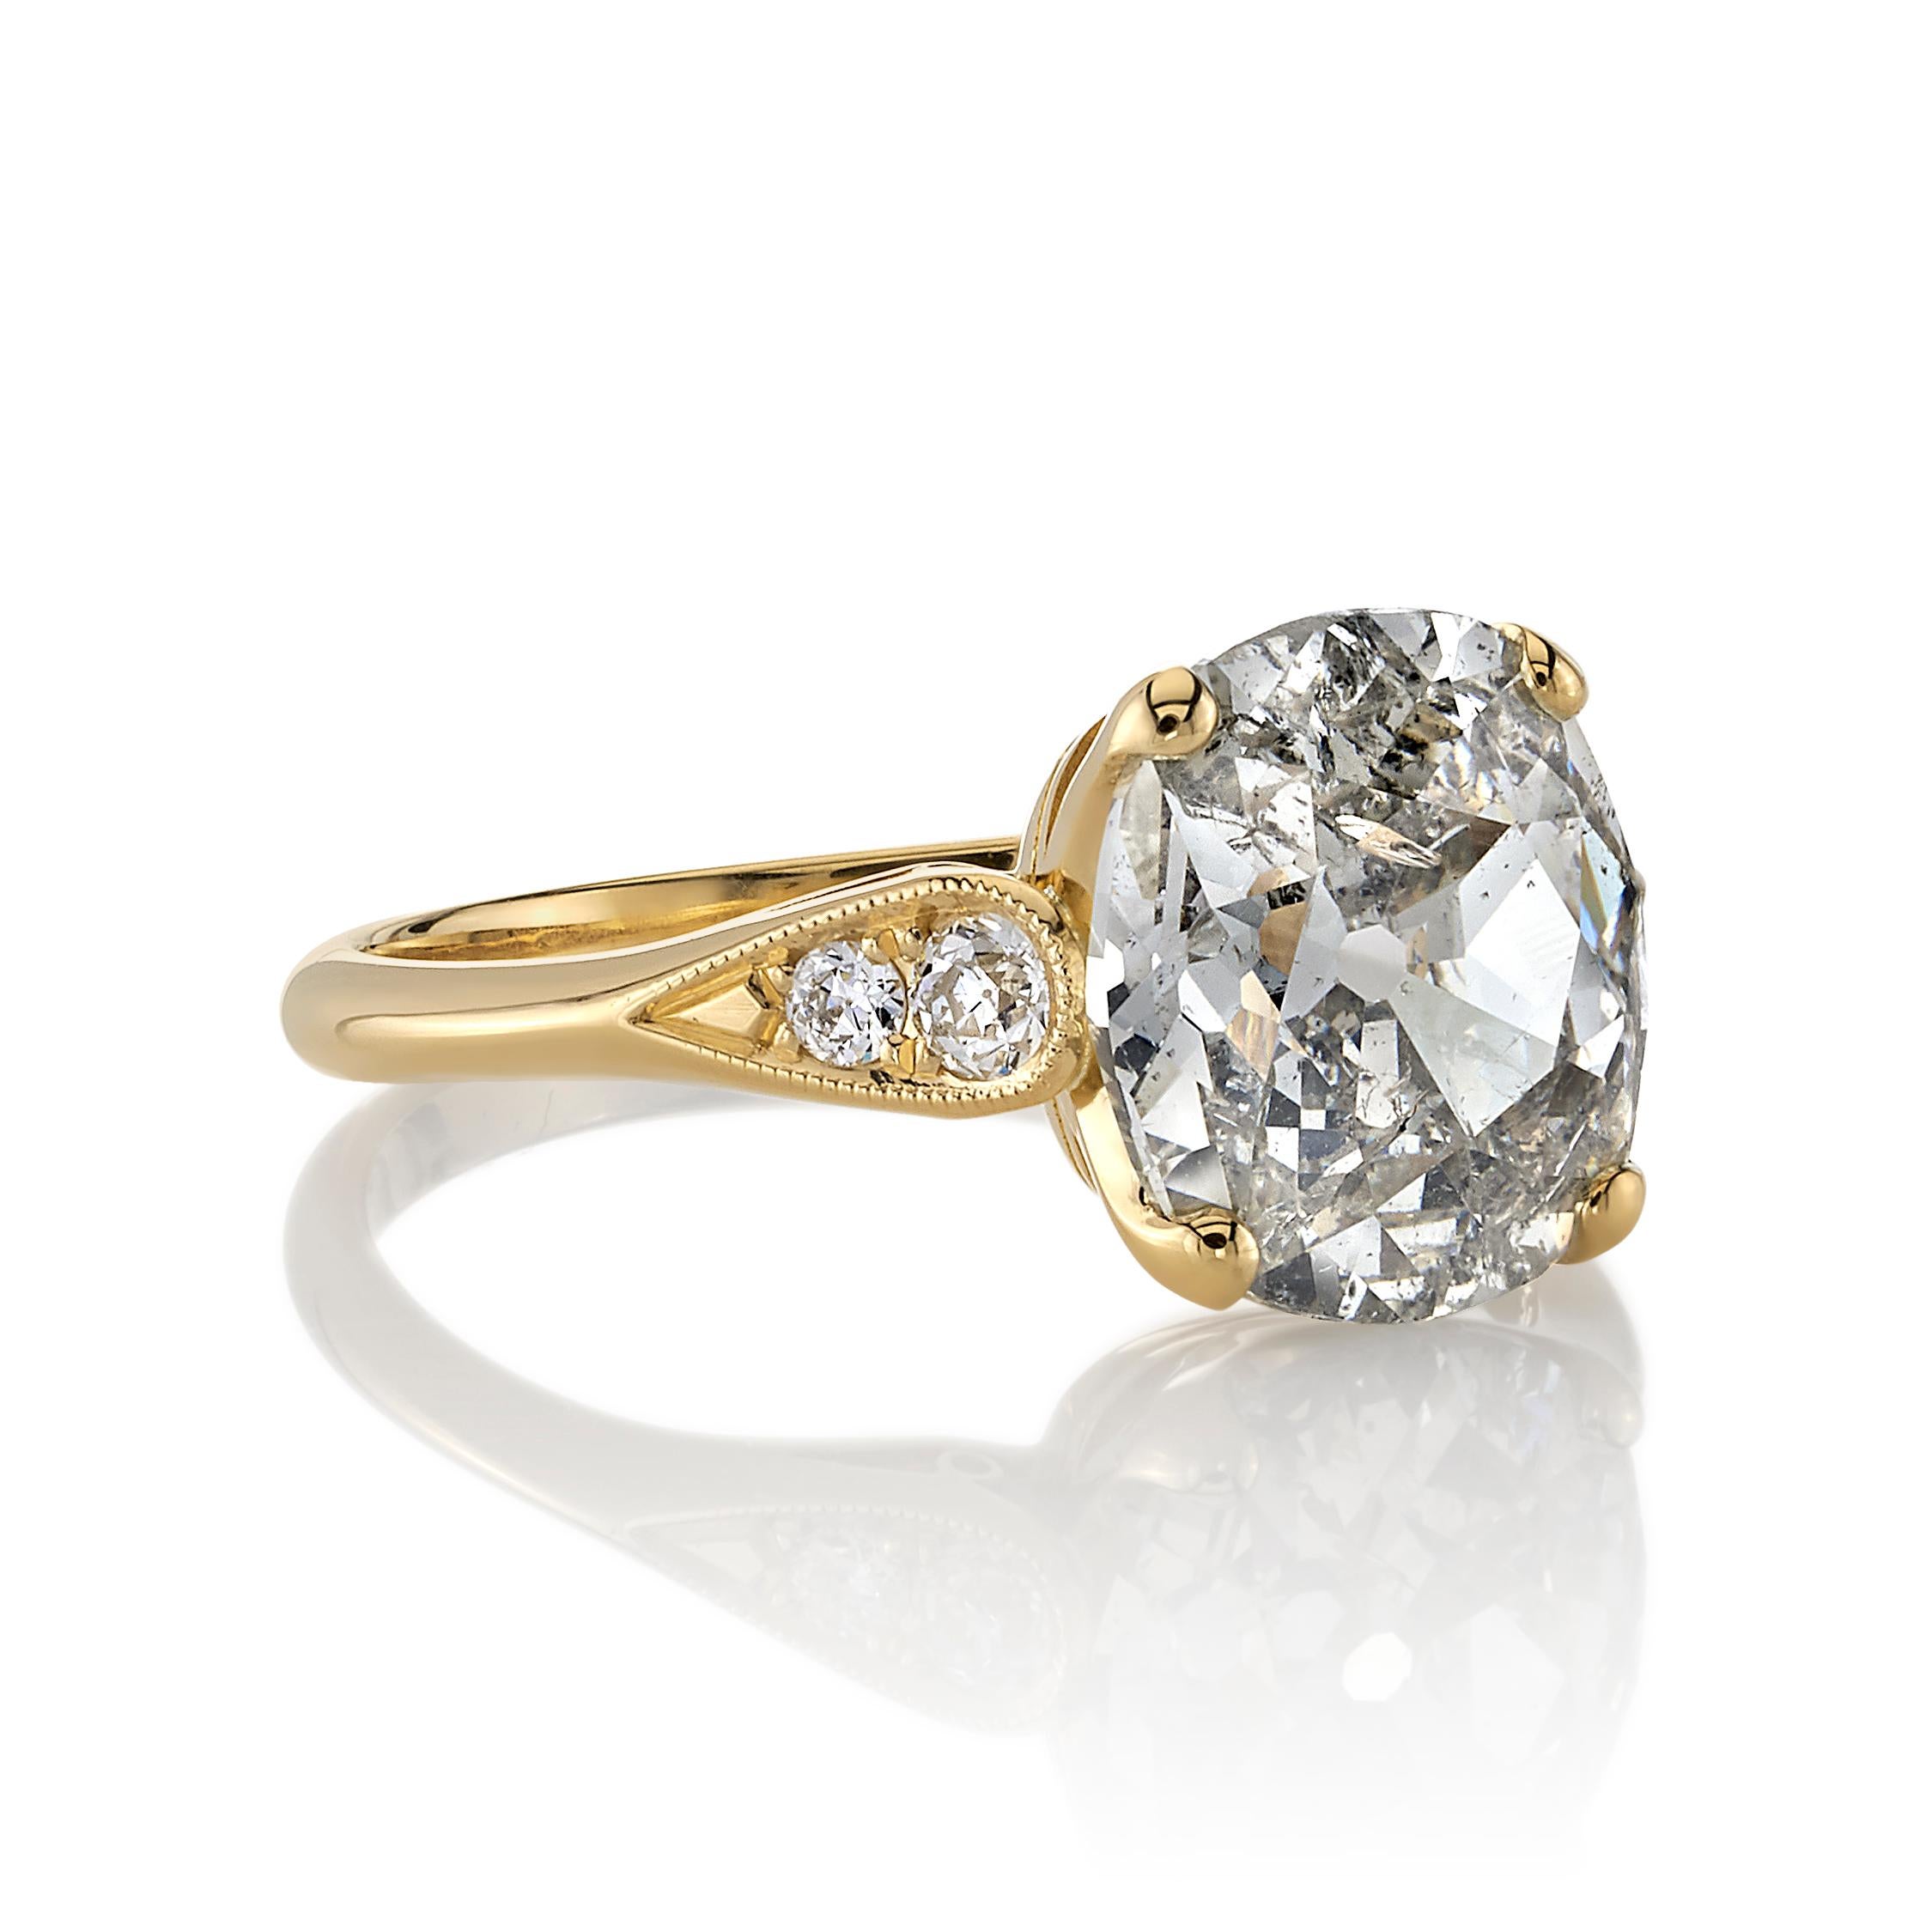 3.03ctw J/I2 GIA certified Cushion cut diamond with 0.15ctw old European cut accent diamonds set in a handcrafted 18K yellow gold mounting.

Ring is currently a size 6, and can be sized to fit.